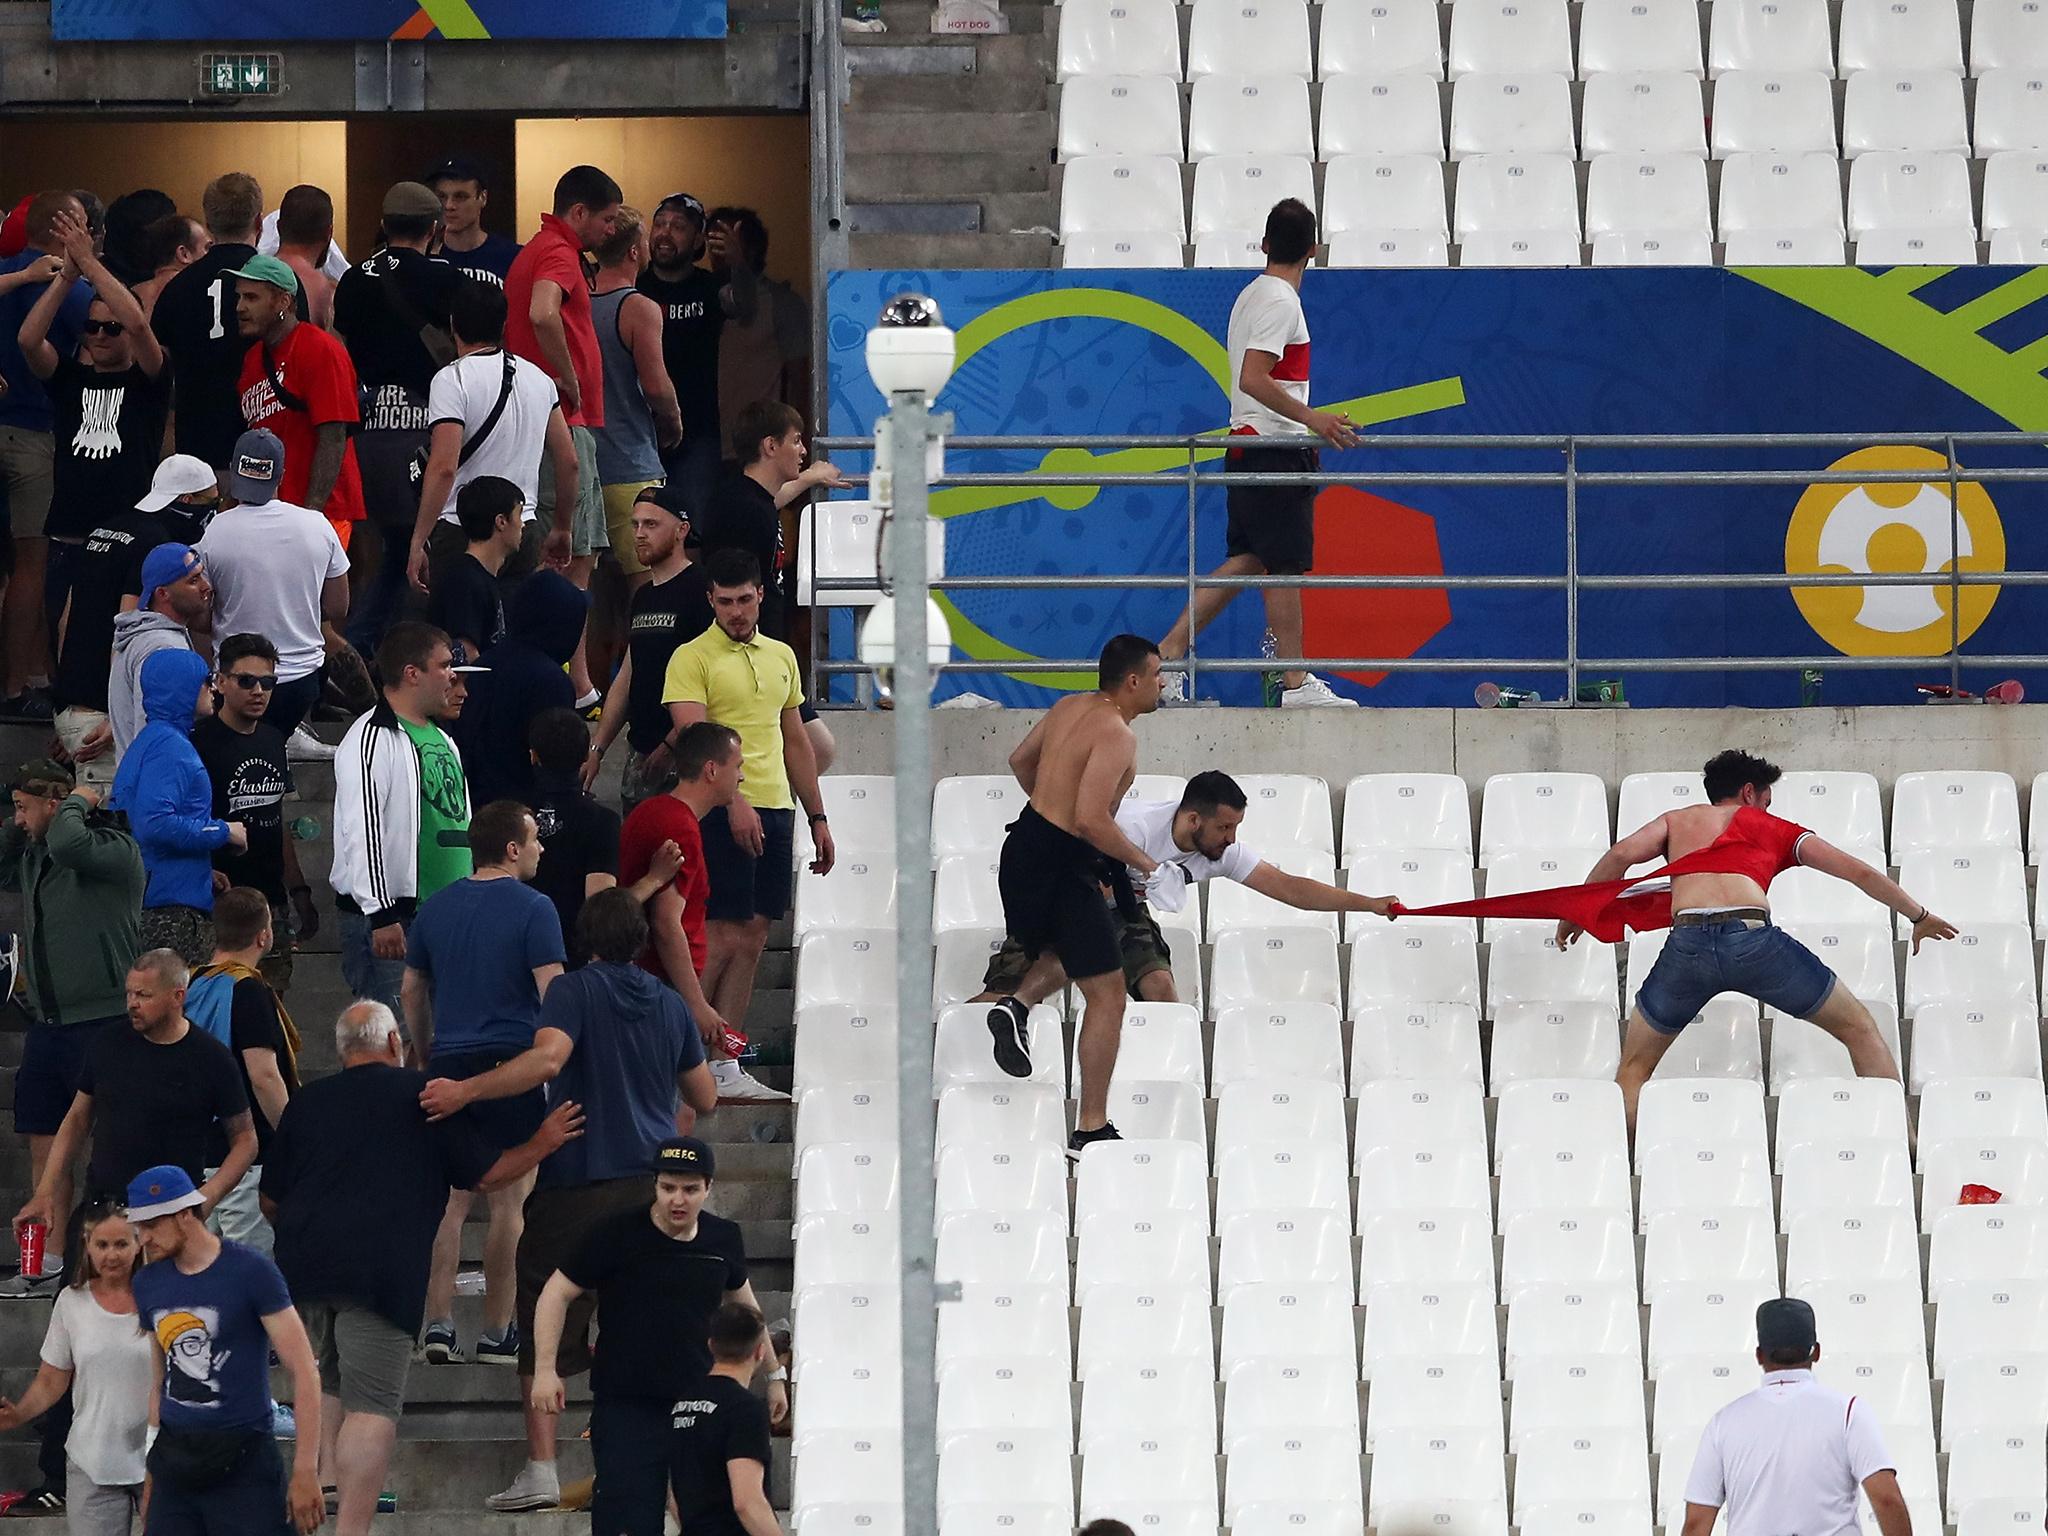 England fans were charged by Russian supporters at the Stade Vélodrome